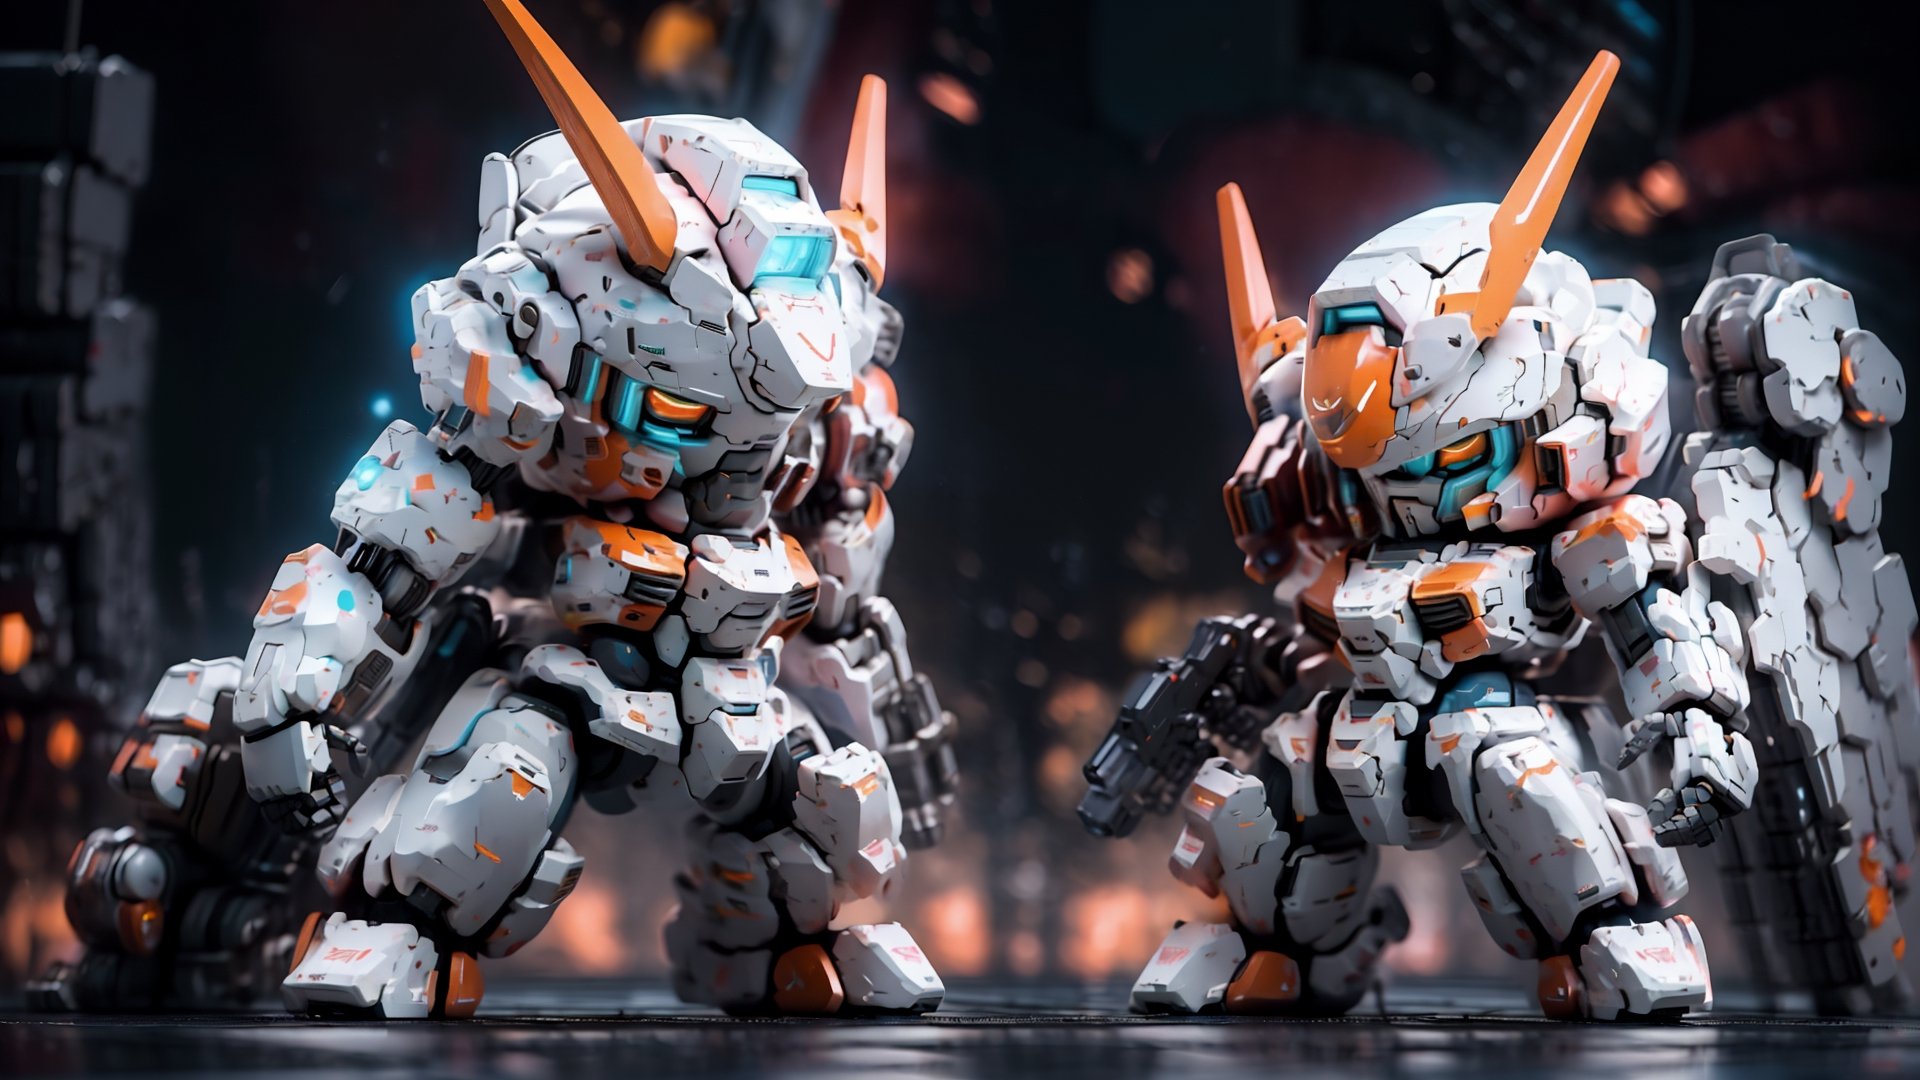 Best quality, masterpiece,  strong contrast,  high level of detail, Best quality, masterpiece,  16k wallpaper,  concept art,  high level of detail,  (HDR:1.4), contrast, vibrant color,
BREAK

BJ_Cute_Mech, 1 bipedal ful larmored mech,  solo,  perfect chibi full body mech,  mech in distance,  mechanical face,  mech face in detail,  huge mechanical head in detail,  hard surface face,  two huge jade eyes like camera lends,  holding,   perfect chibi full body, extremely small torso,  weapon,  chibi,  ((holding_weapon:1.3)),  gun, blush_stickers,  helmet, (holding_Assault rifle:1.3),  android,  joints,  robot_joints,  orange rivet on joints,  hard surface,  heavy armored head and body, heavy armored arms and legs, the mech is white and orange in color,  it has a round head and a triangular visor,  the mech’s head is small,  the mech’s head is integrated with the mech’s body,  no neck,  The mech’s body is a white oval-shaped box,  the box is connected to the mech’s head and shoulders,  the box has an orange line on the front,  the line separates the mech’s chest and abdomen,  the box has an orange circular part on the side,  the part separates the mech’s waist and abdomen, standing pose,  

steampunk battle field  background,  depths of deep field, 

cinematic lighting, ,BJ_Cute_Mech,High detailed ,BJ_Gundam, BJ_Gundam,QRobot